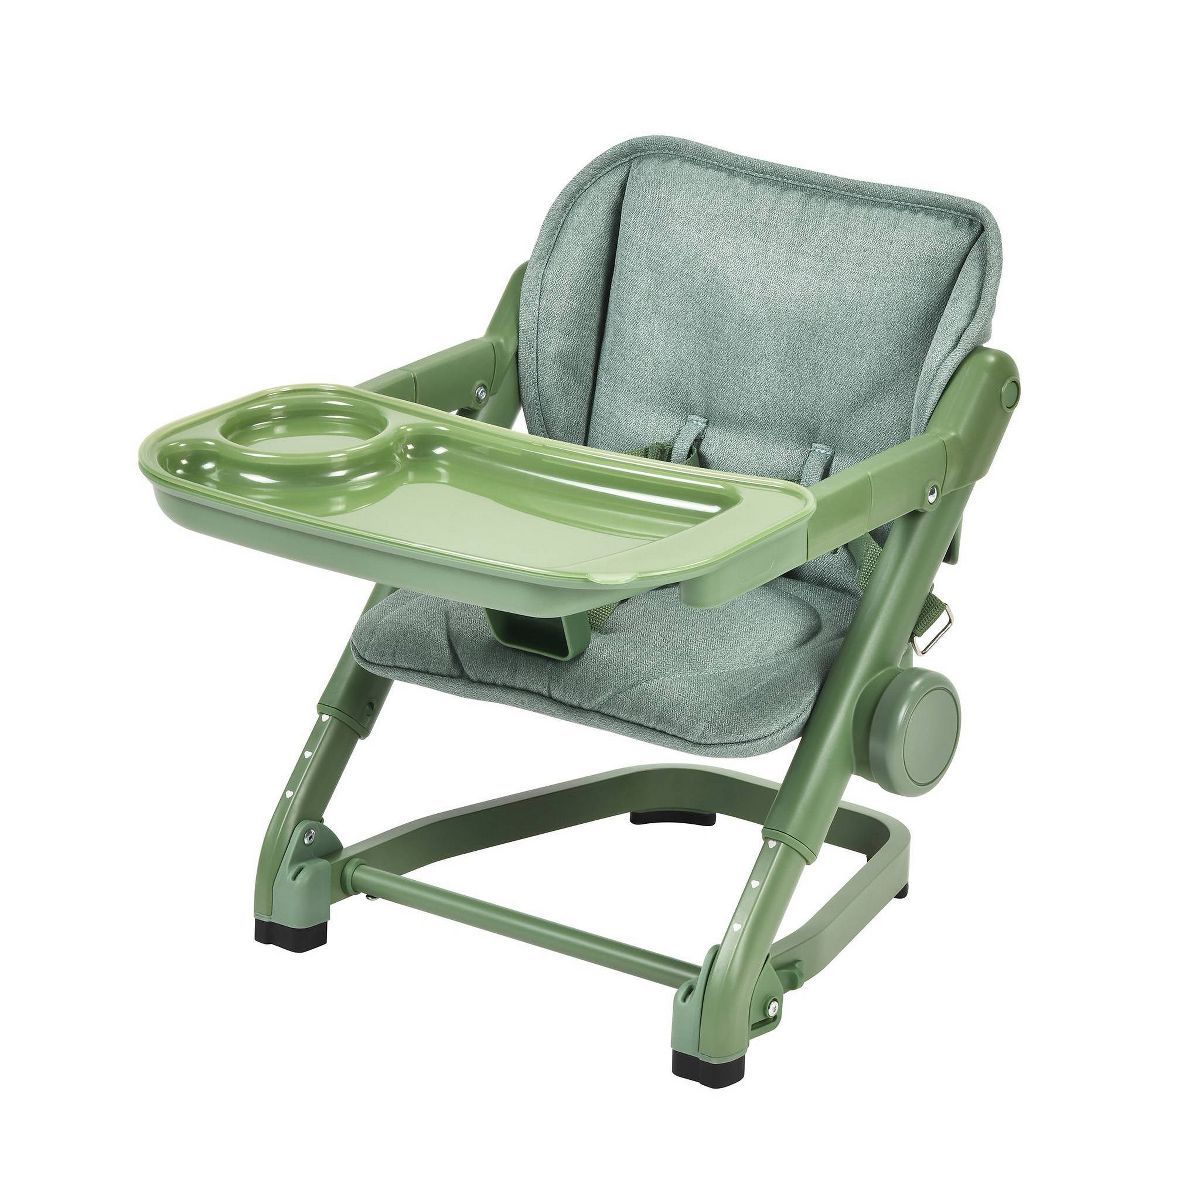 Unilove Feed Me Booster Chair - Avocado Green | Target